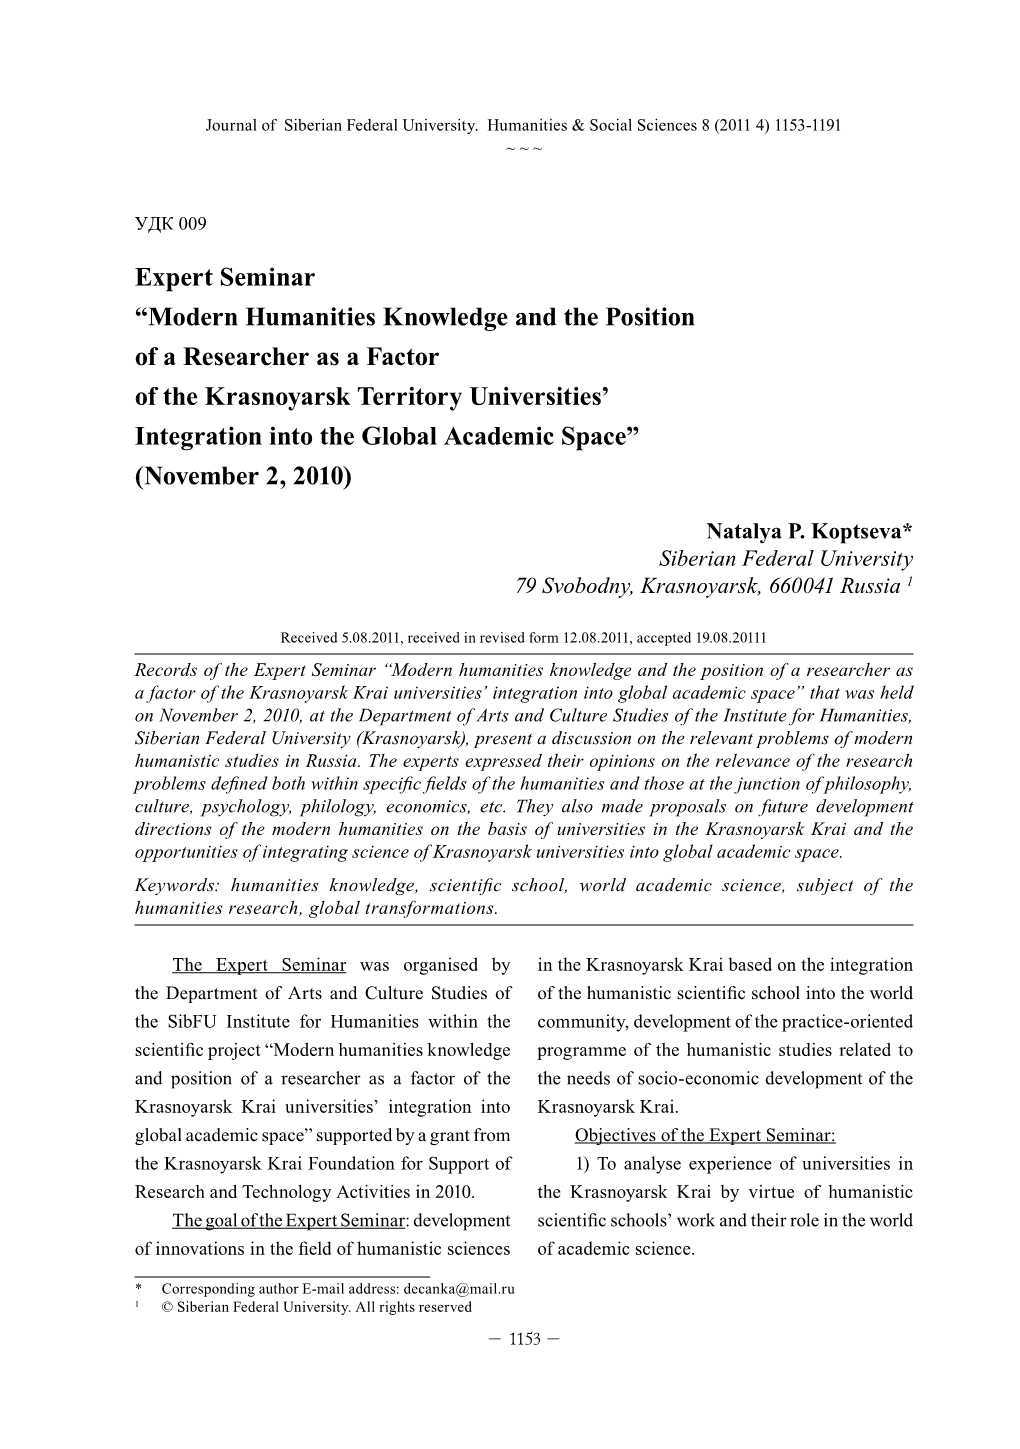 Expert Seminar “Modern Humanities Knowledge and the Position of a Researcher As a Factor of the Krasnoyarsk Territory Unive